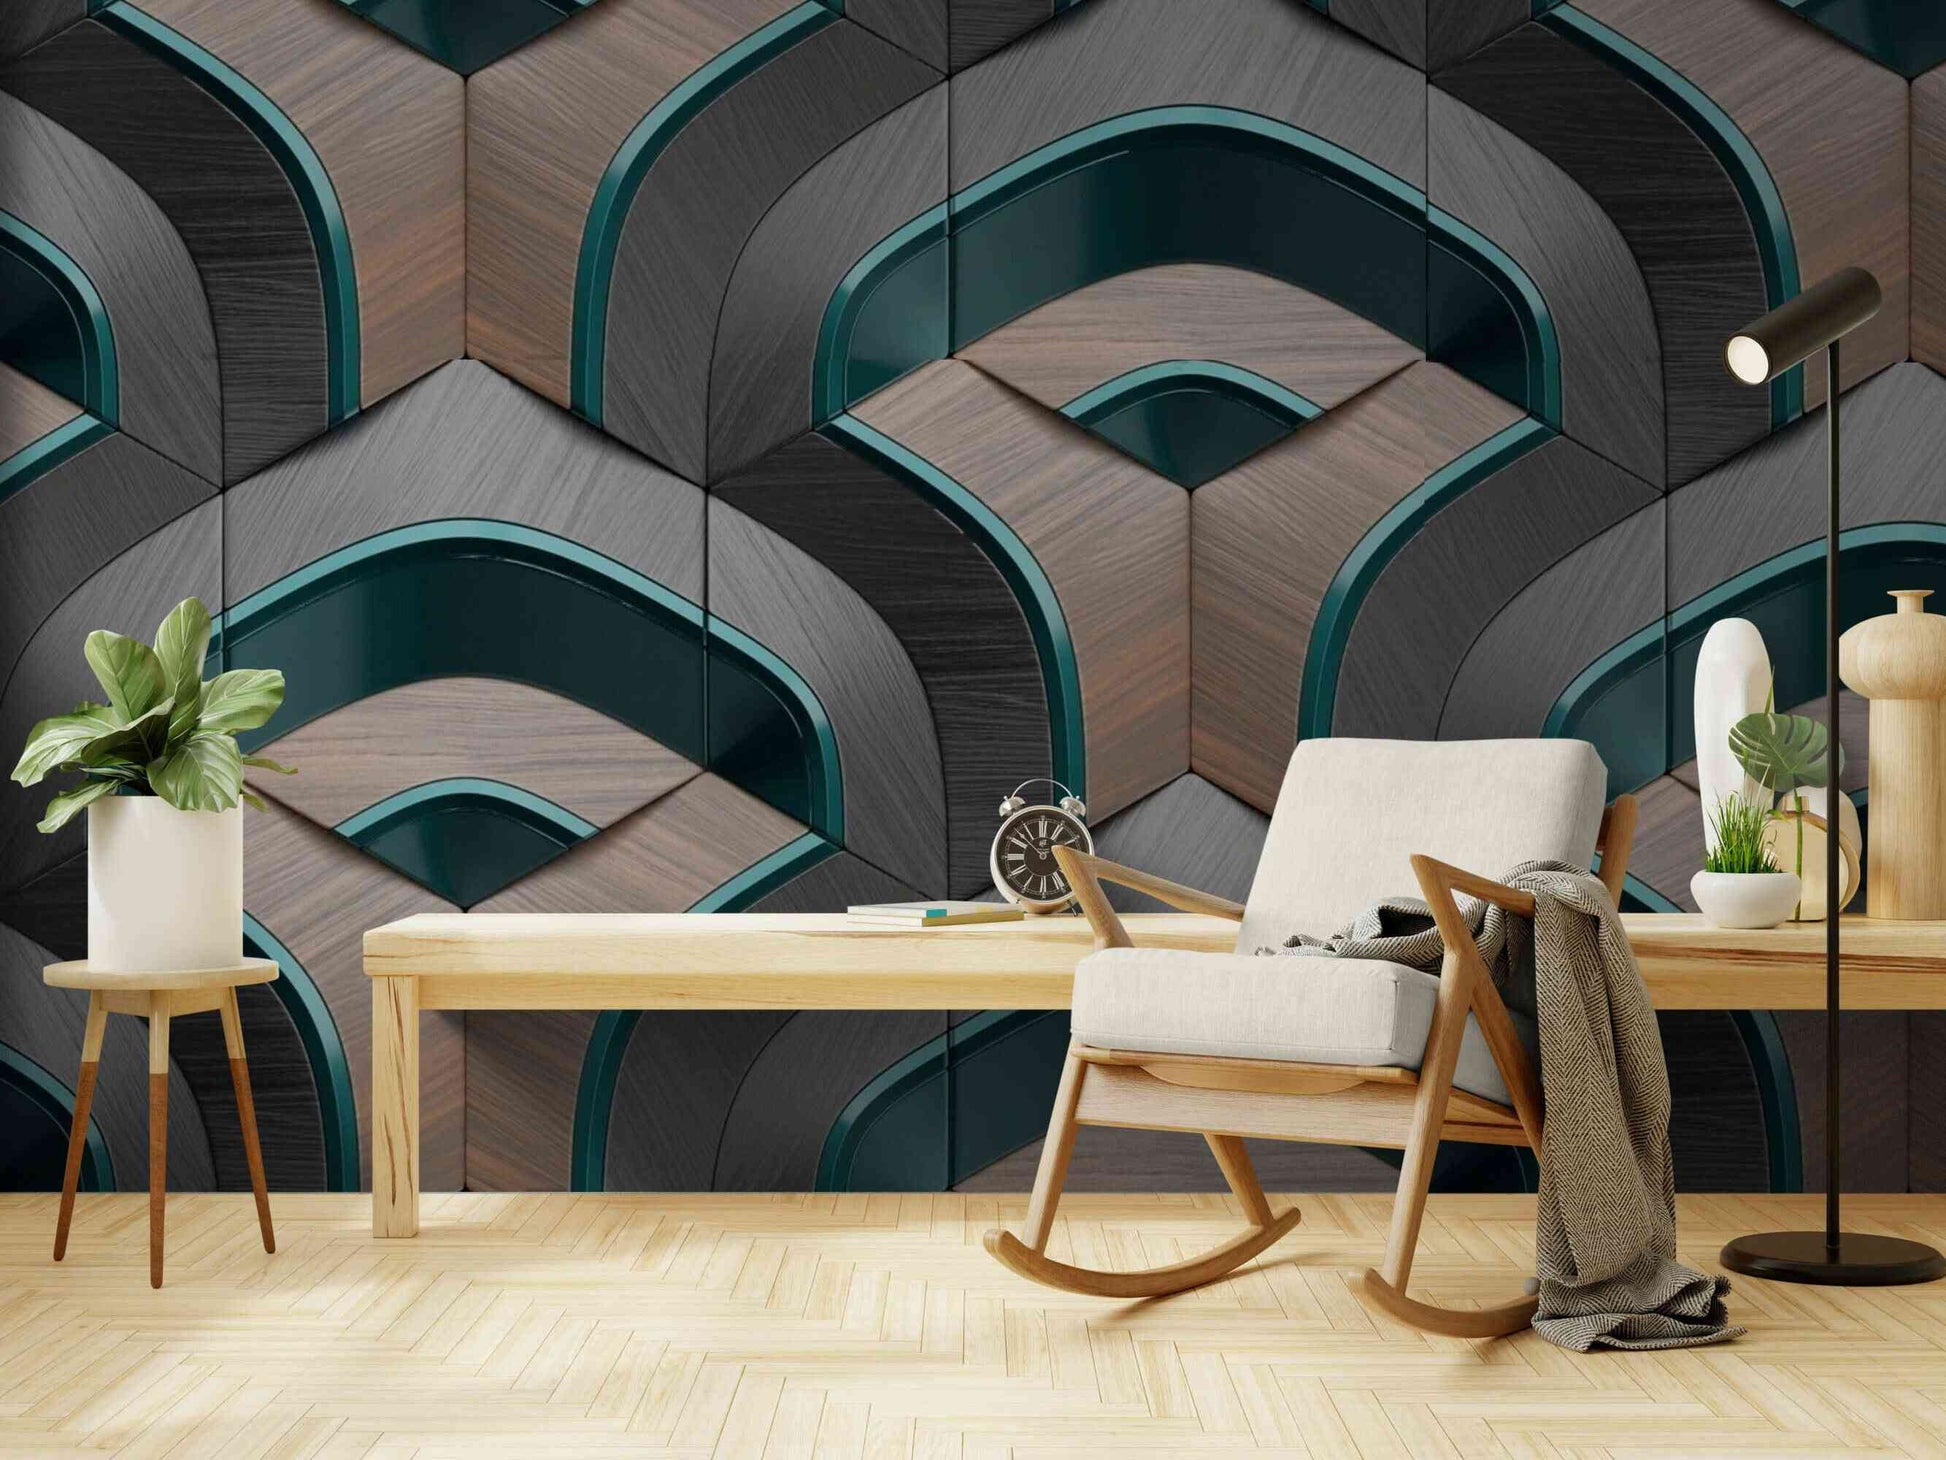 Abstract 3D Wallpaper Mural in a Kitchen